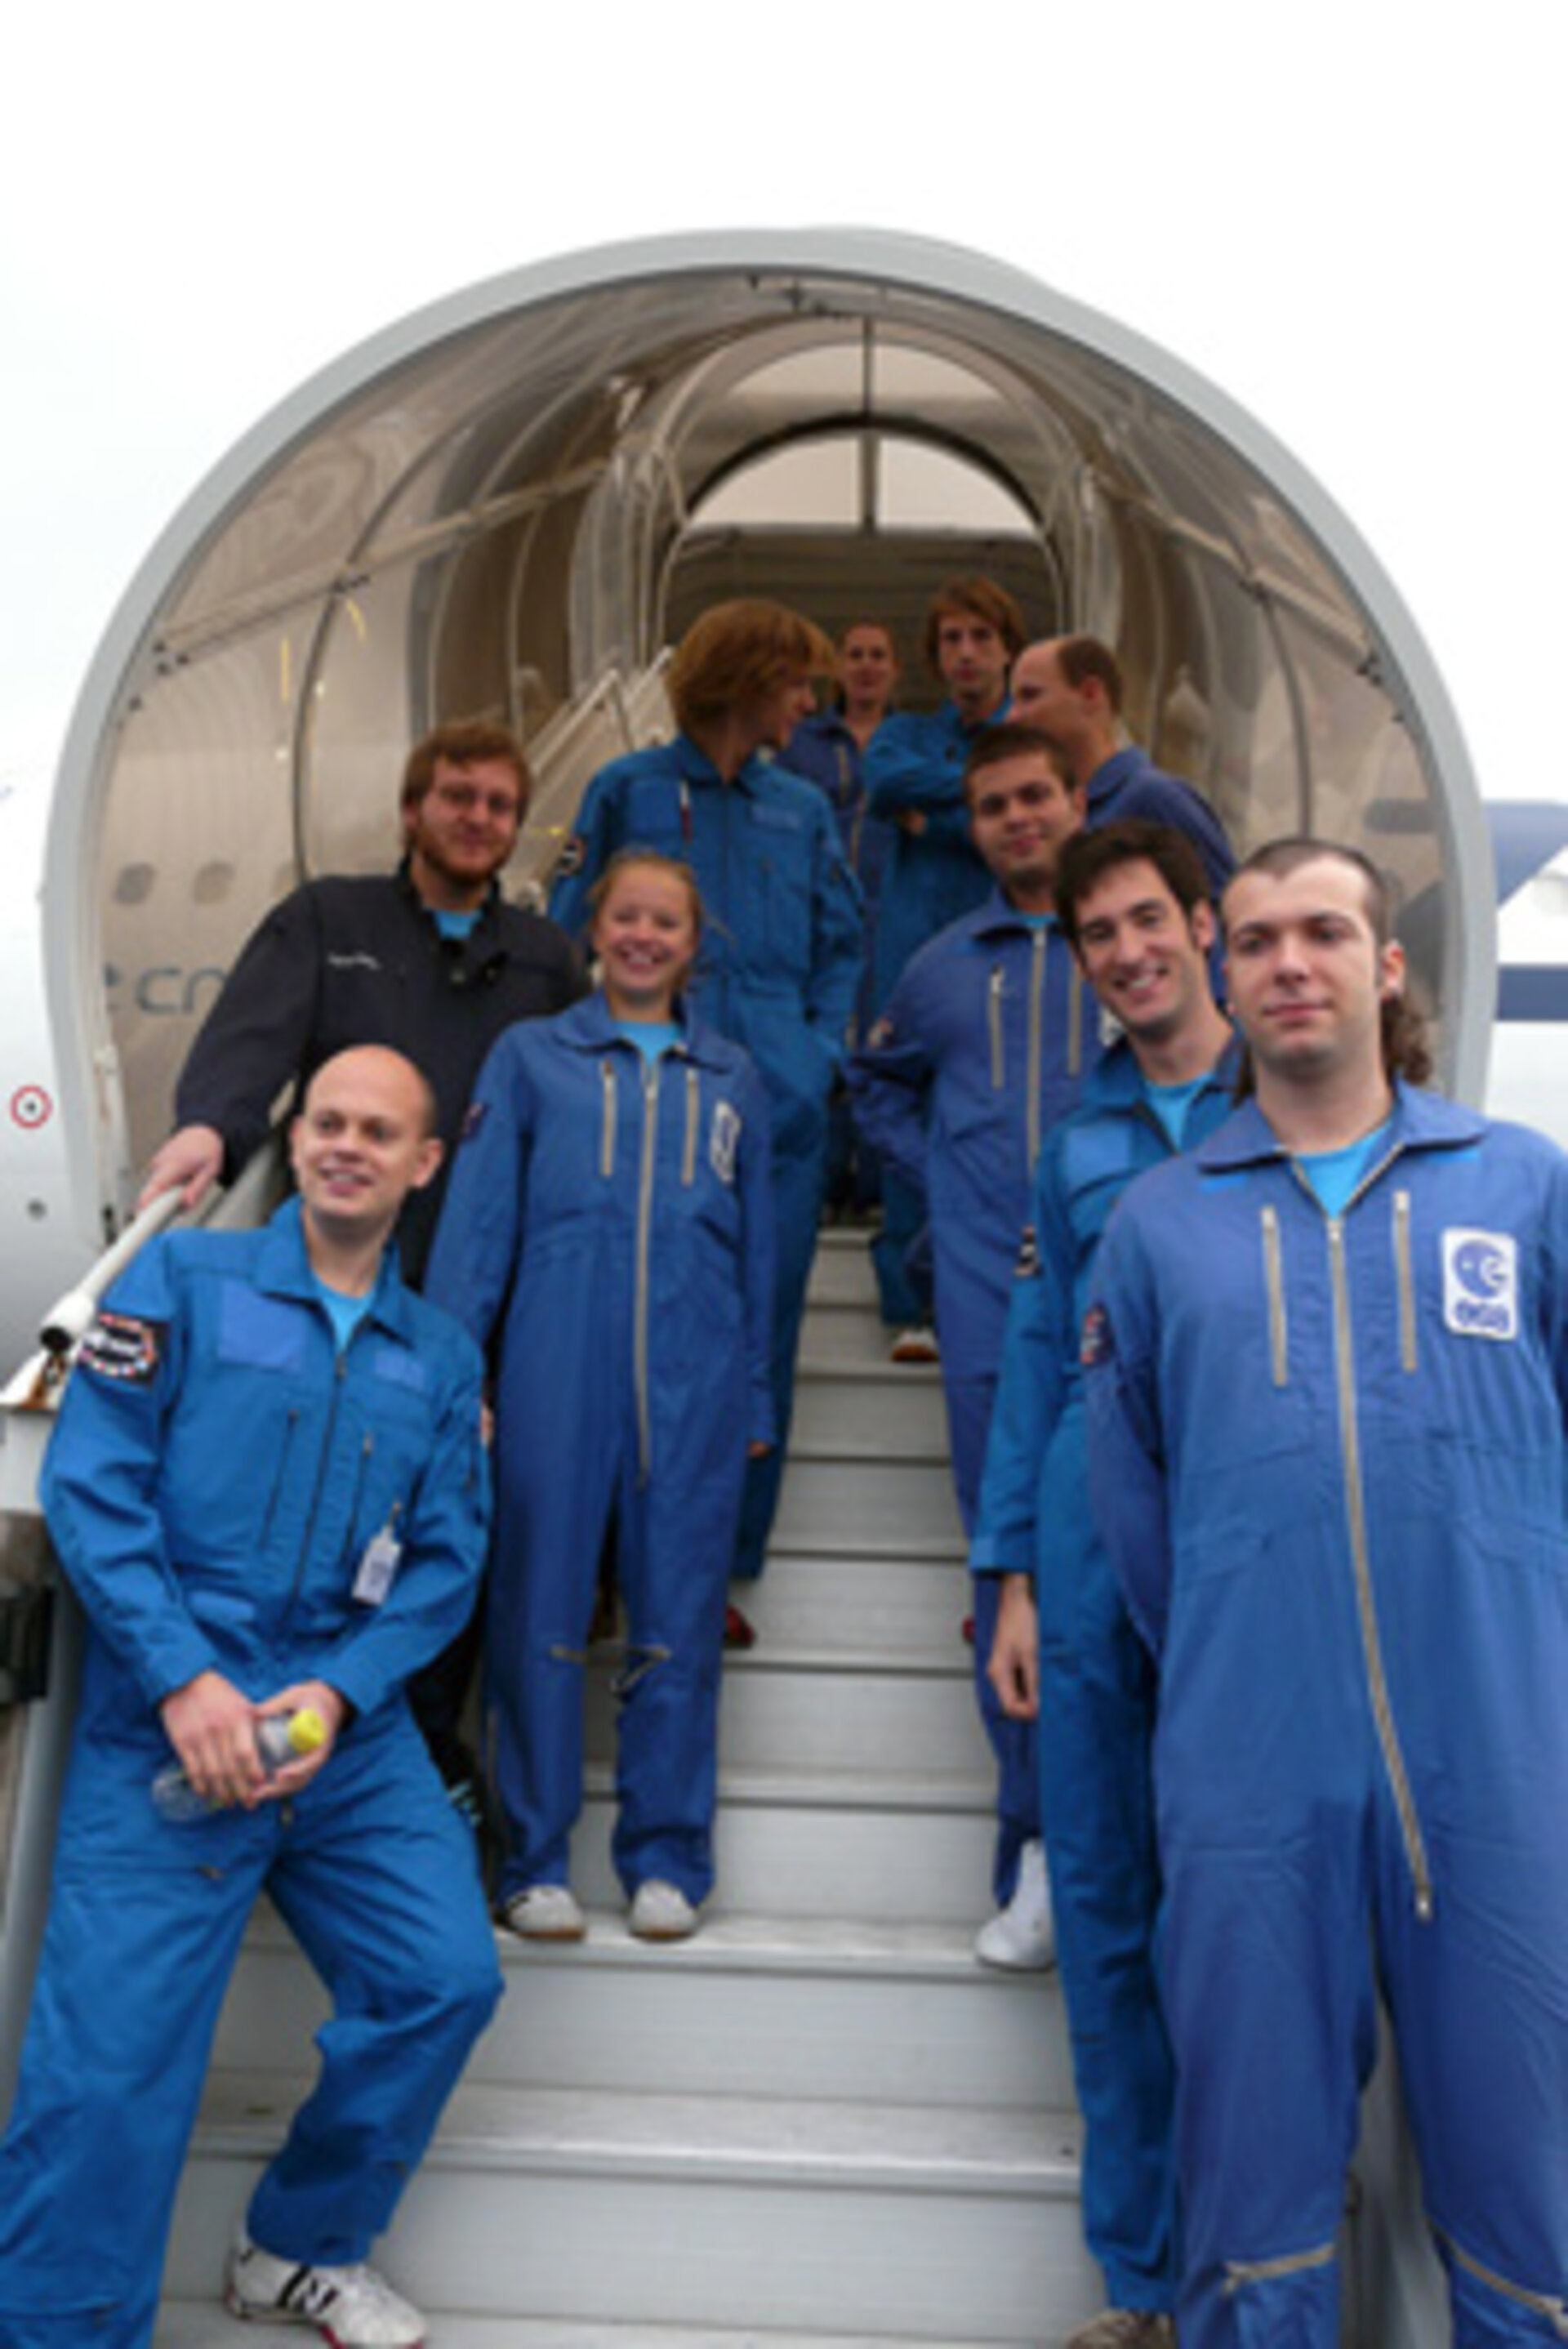 Students boarding the plane for the first parabolic flight of the 2009 campaign